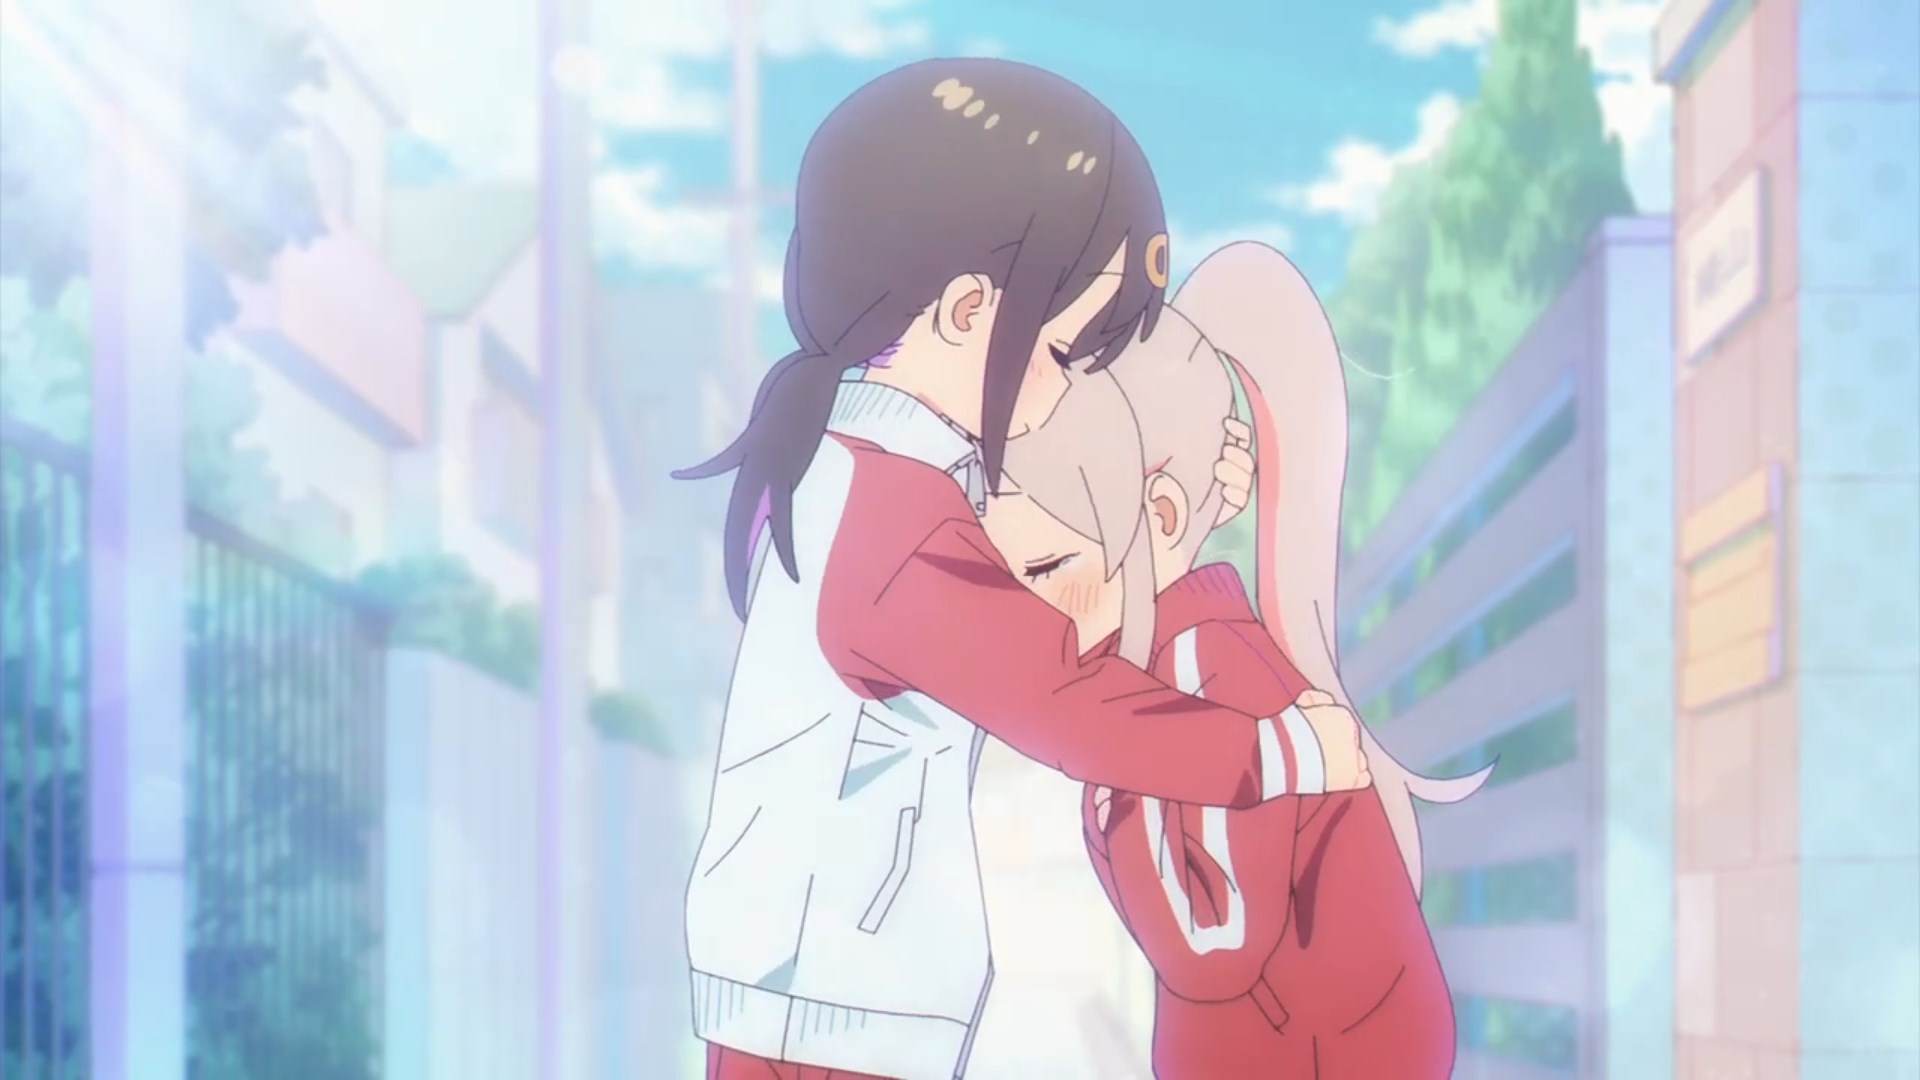 Mahiro and Mihari hugging each other, frame from the first episode of the series